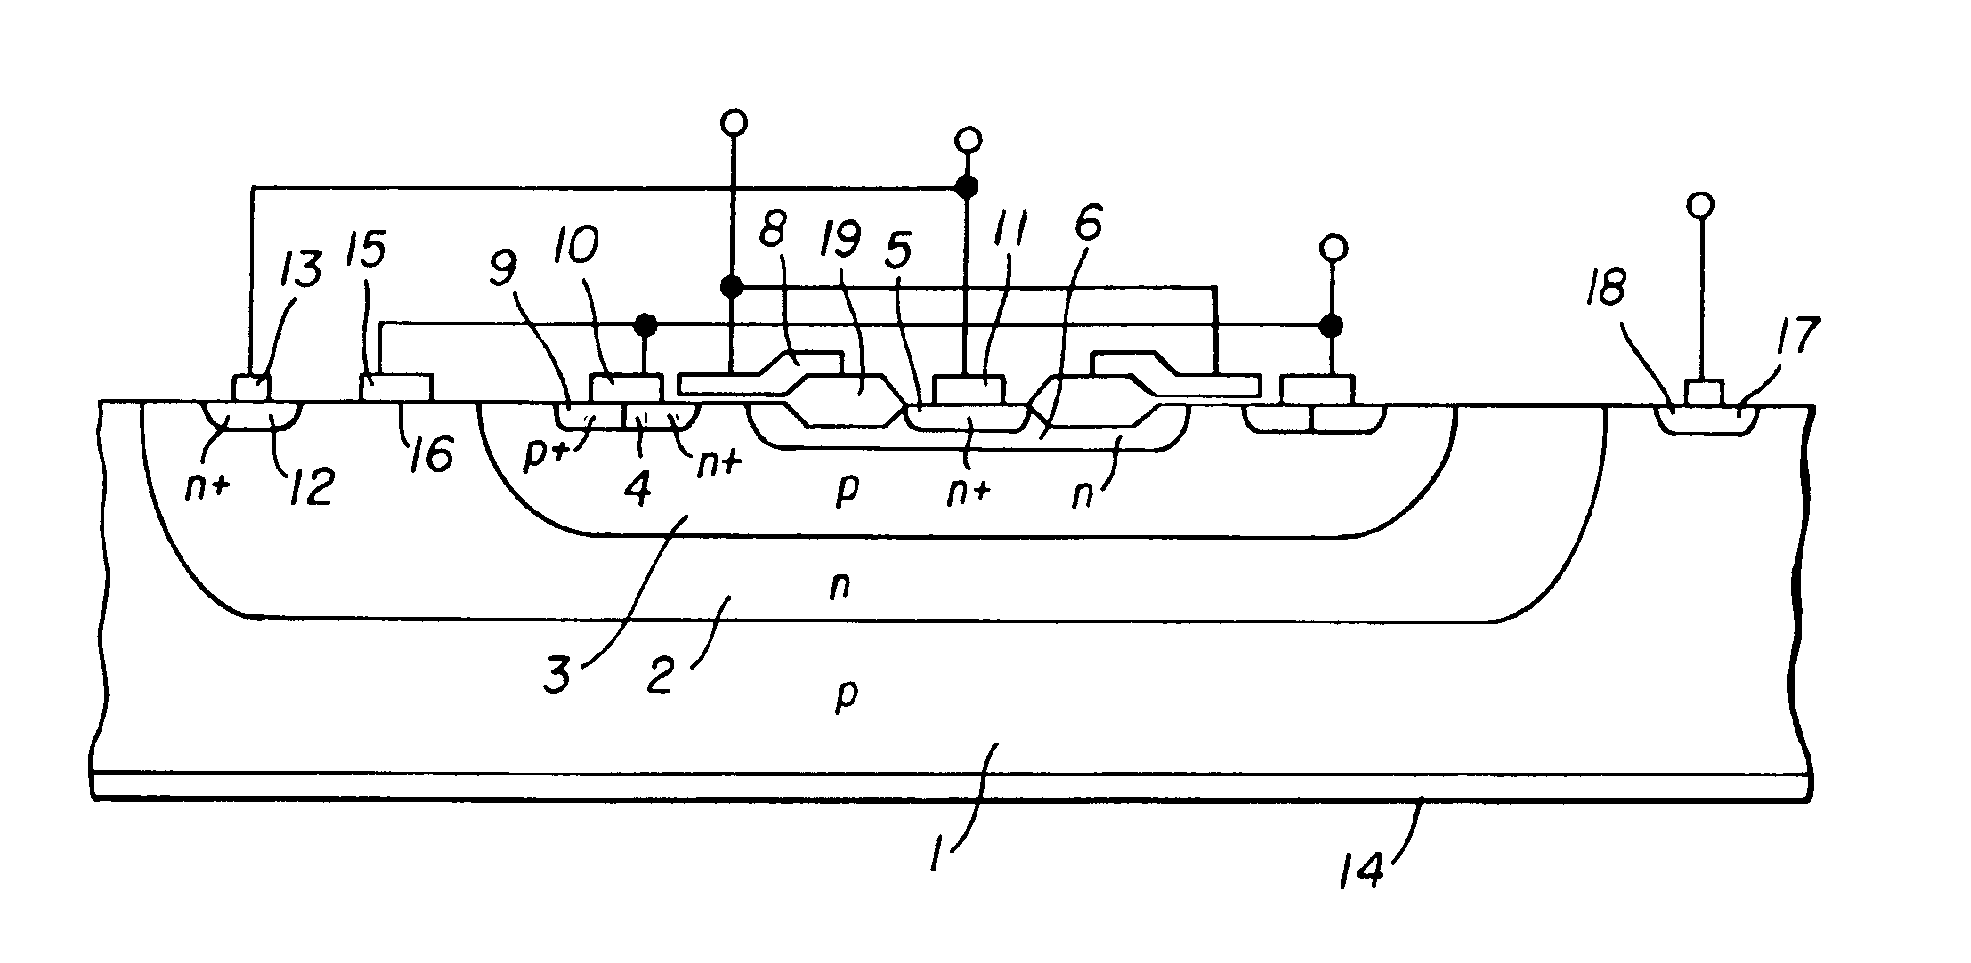 High power semiconductor device having a Schottky barrier diode